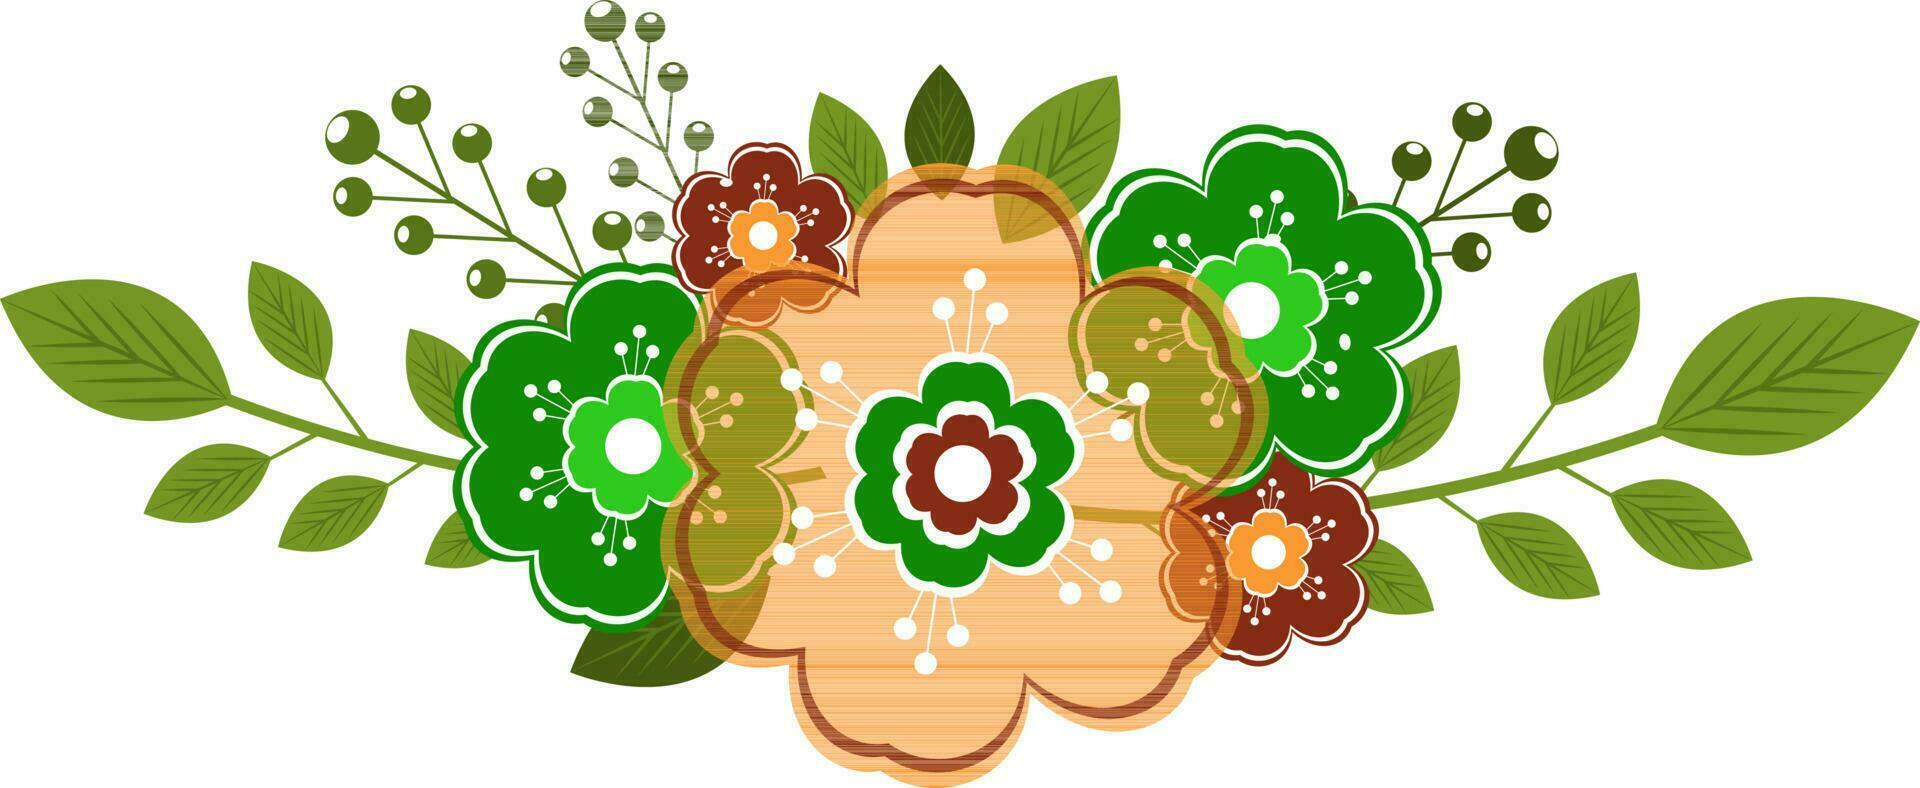 Illustration of beautiful flowers and leaves. vector